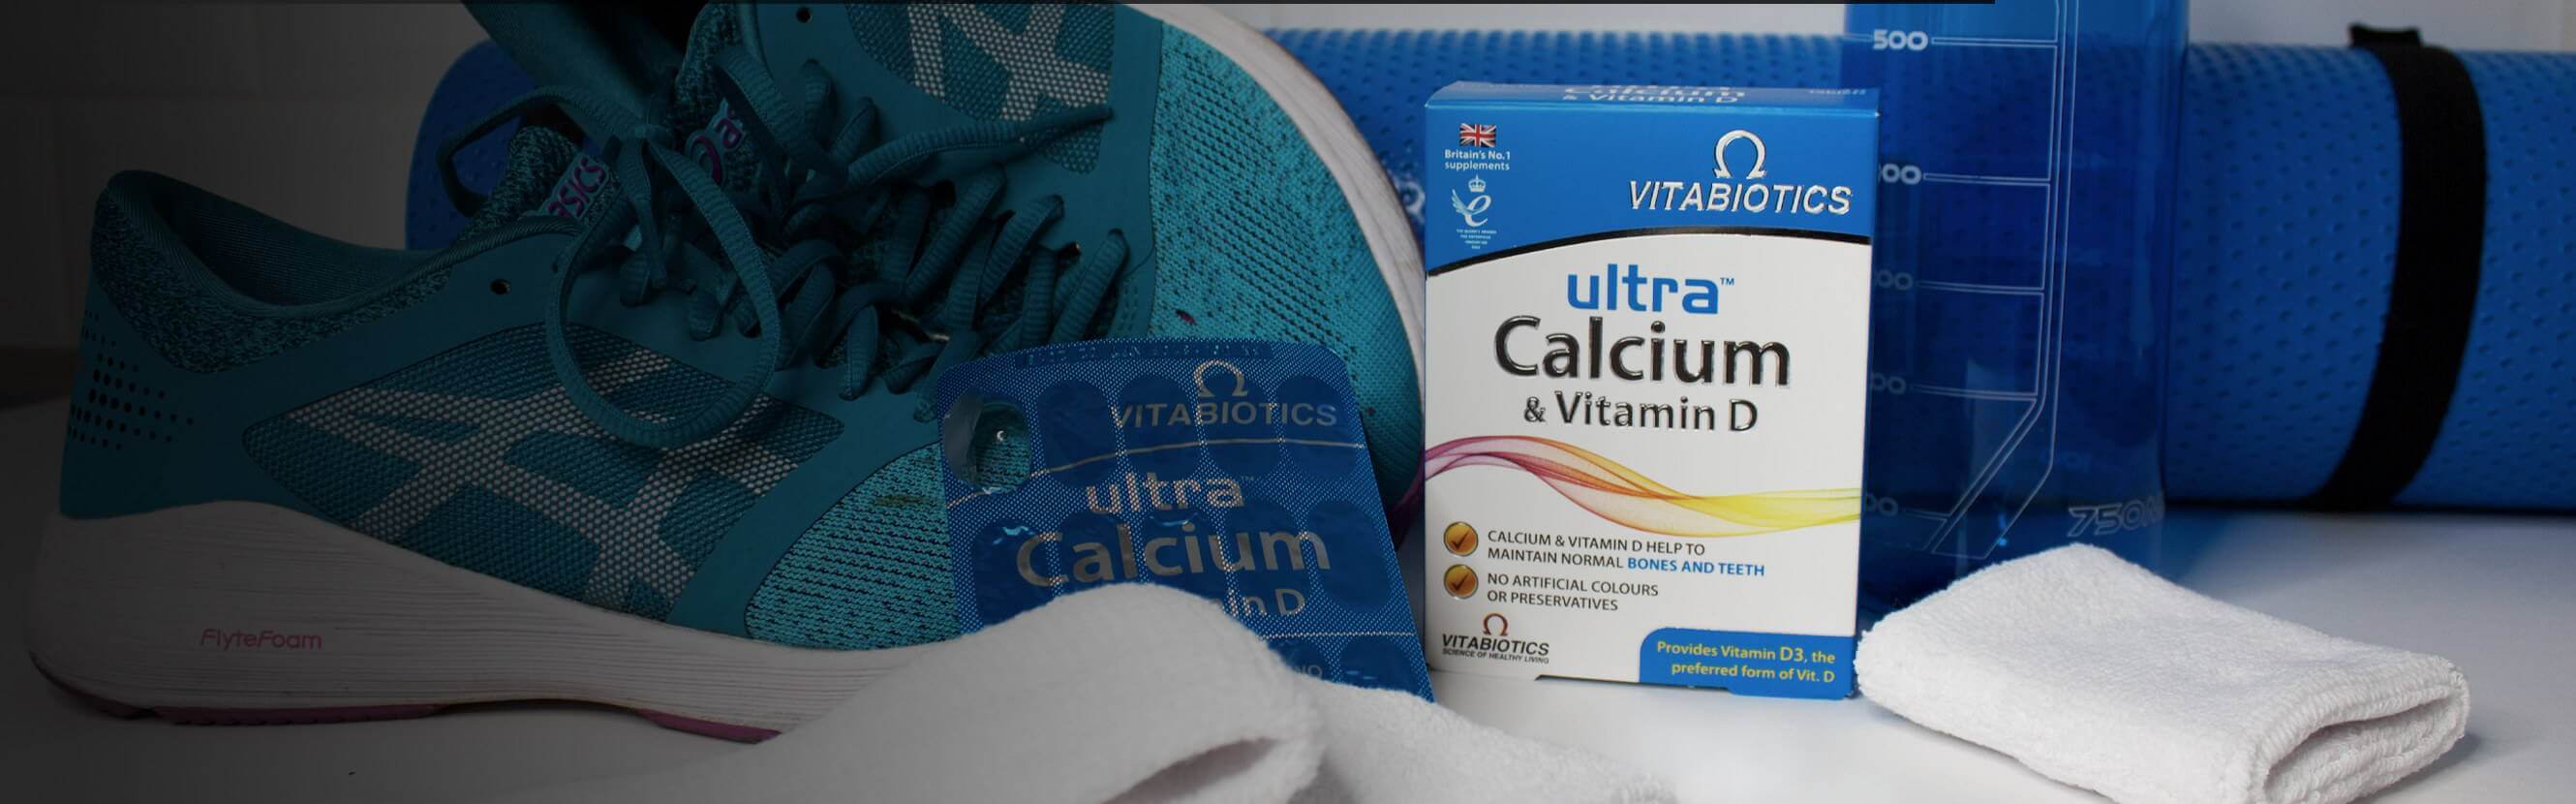  Ultra Calcium is formulated with Calcium itself, but also Vitamin D which contributes to the normal absorption and utilisation of Calcium.  